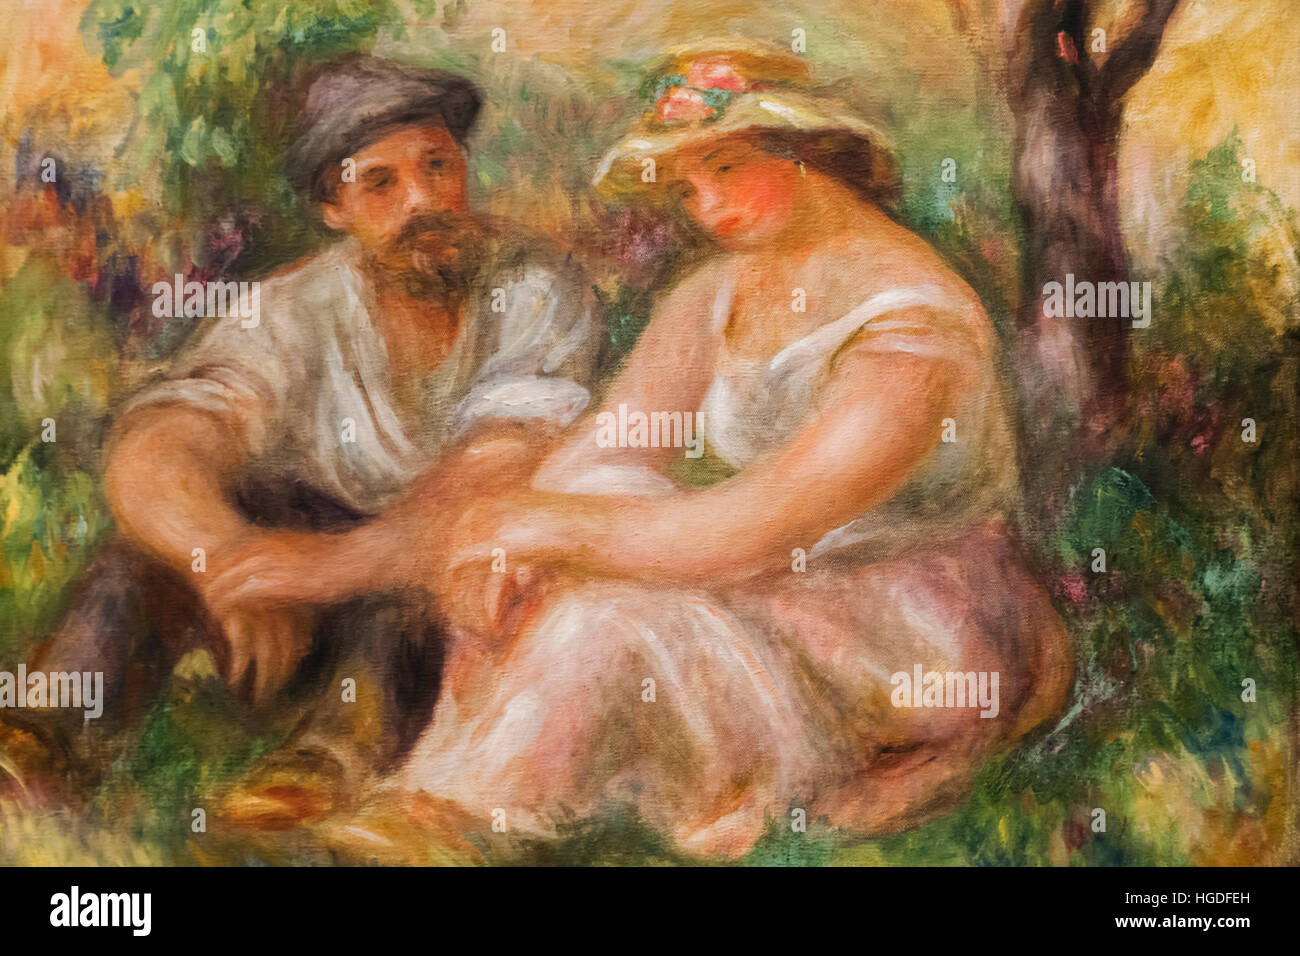 Wales, Cardiff, National Museum Cardiff, Painting titled 'Conversation' by Pierre-Auguste Renoir dated 1912 Stock Photo